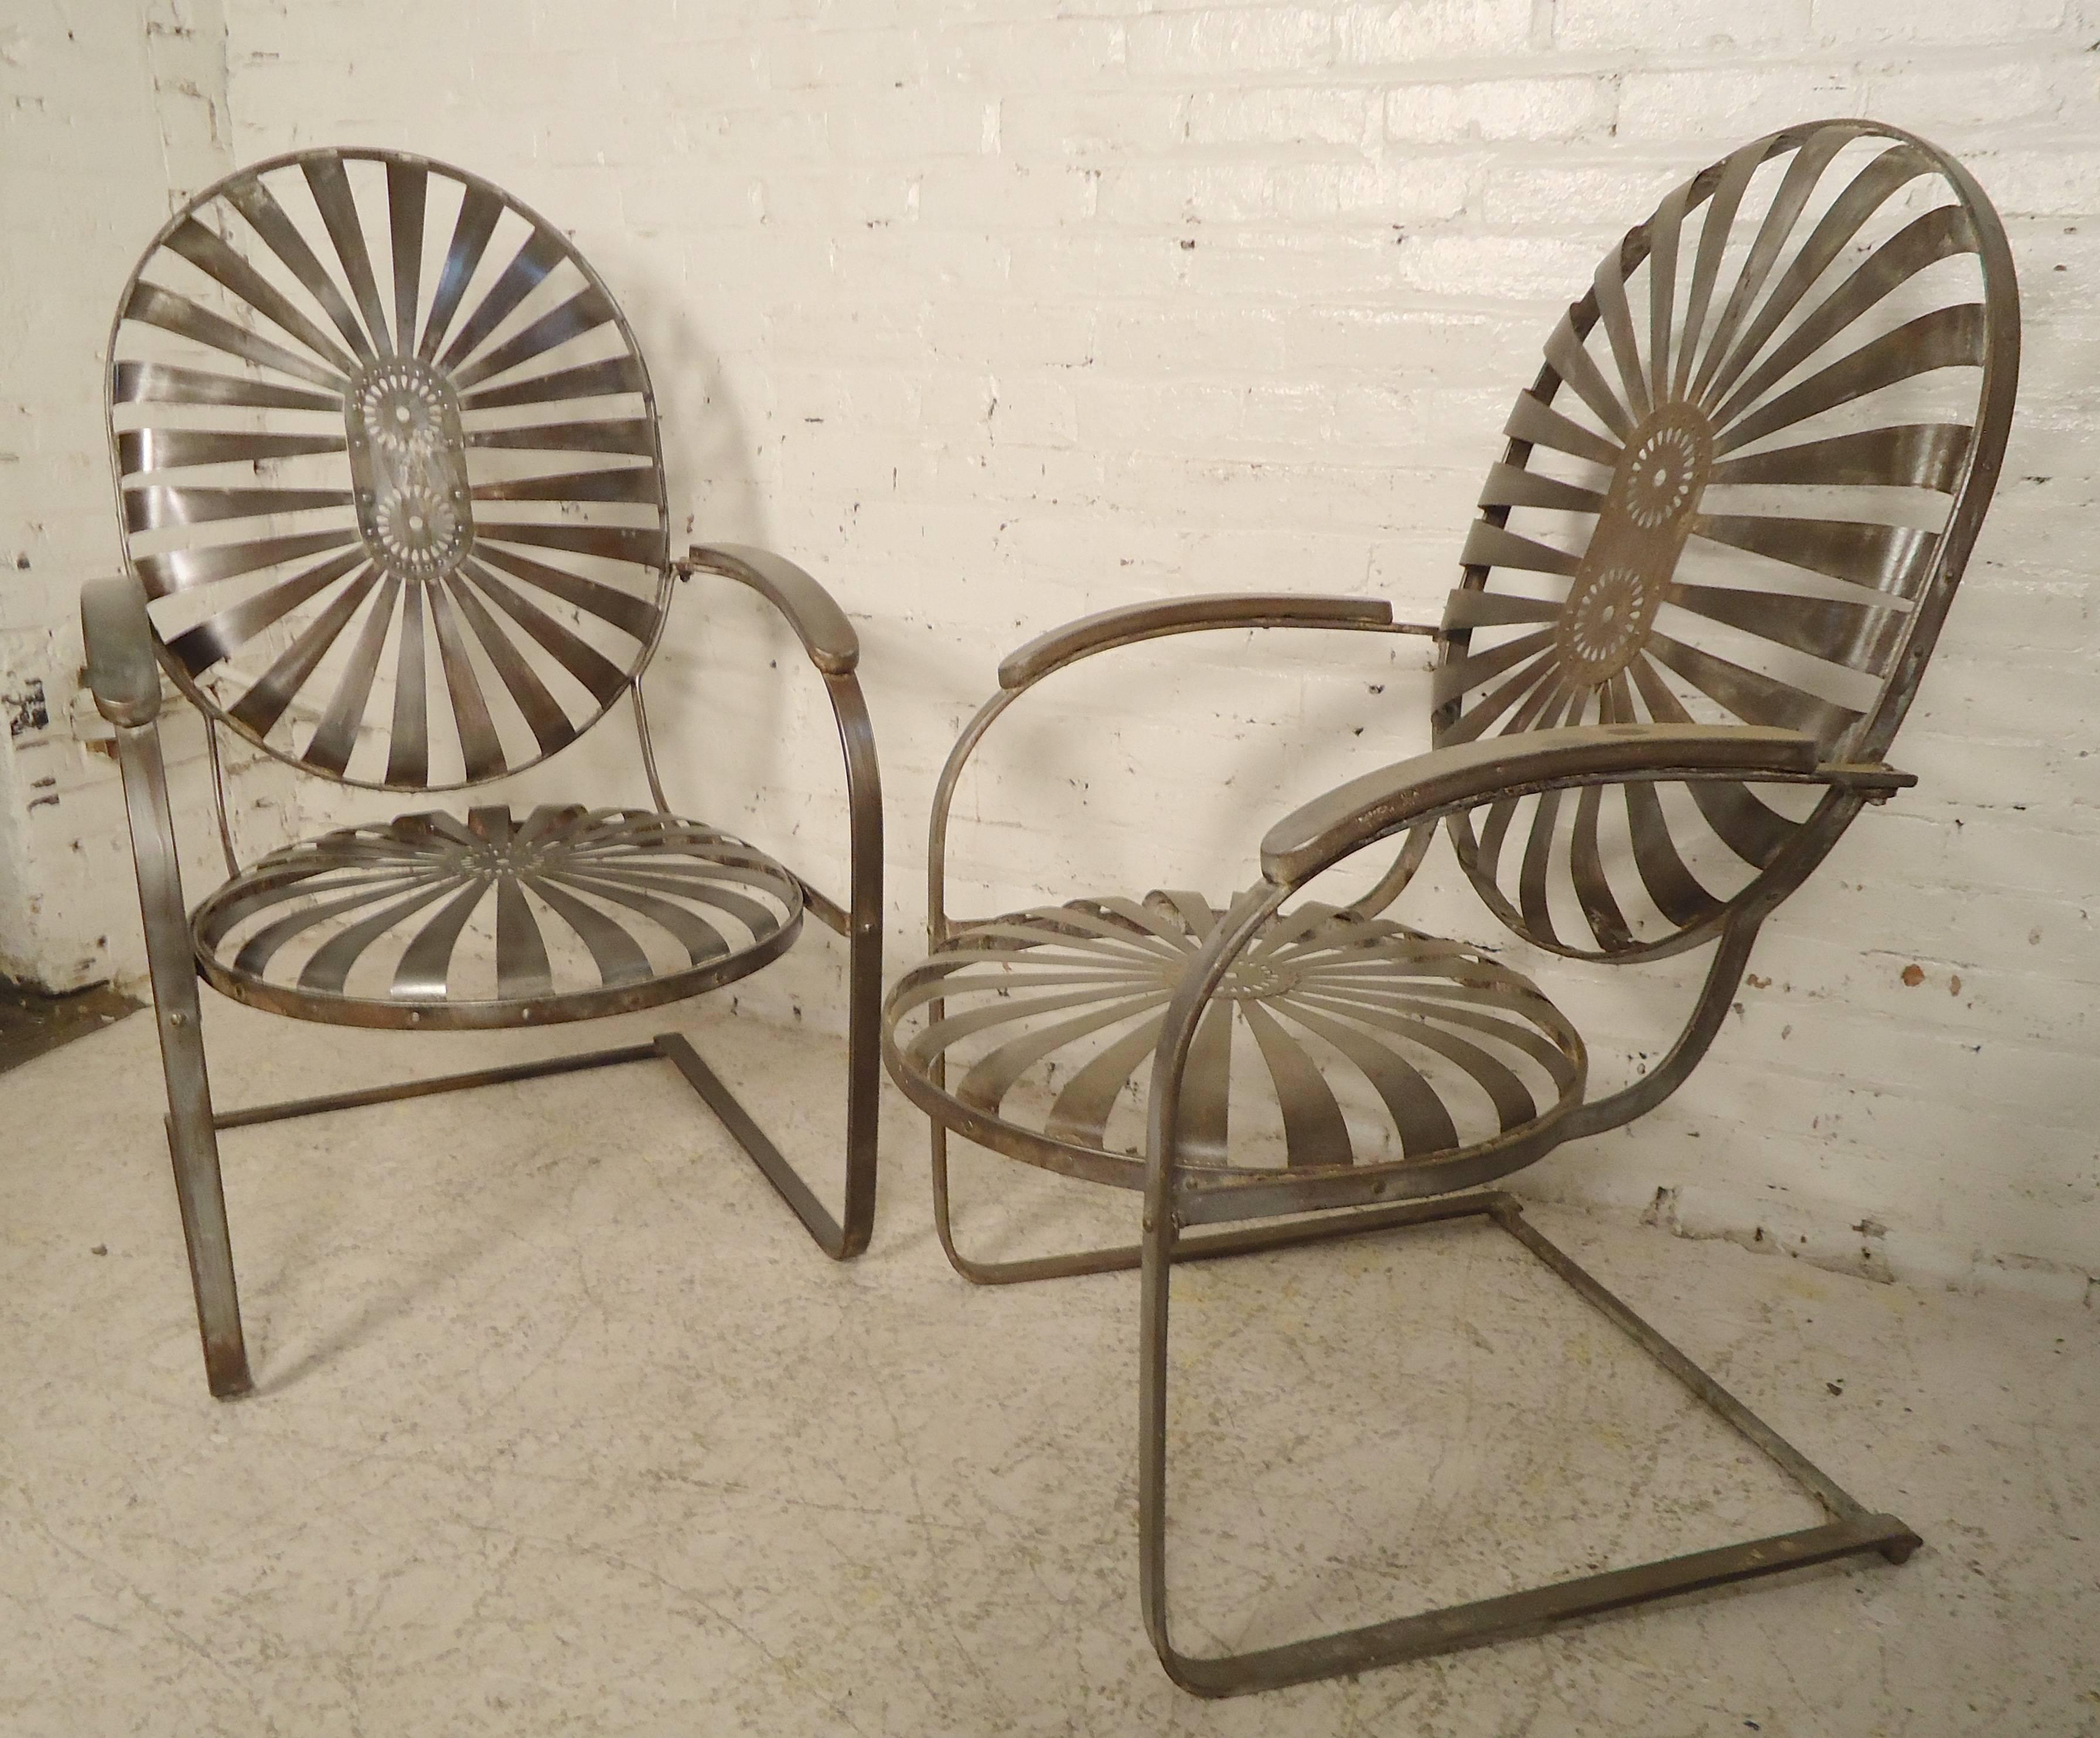 Two Mid-Century spring chairs with cantilever base. Restored in a rough bare metal style finish. Spring base and flexible seat and back provide comfortable seating indoors or out.

(Please confirm item location - NY or NJ - with dealer).
 